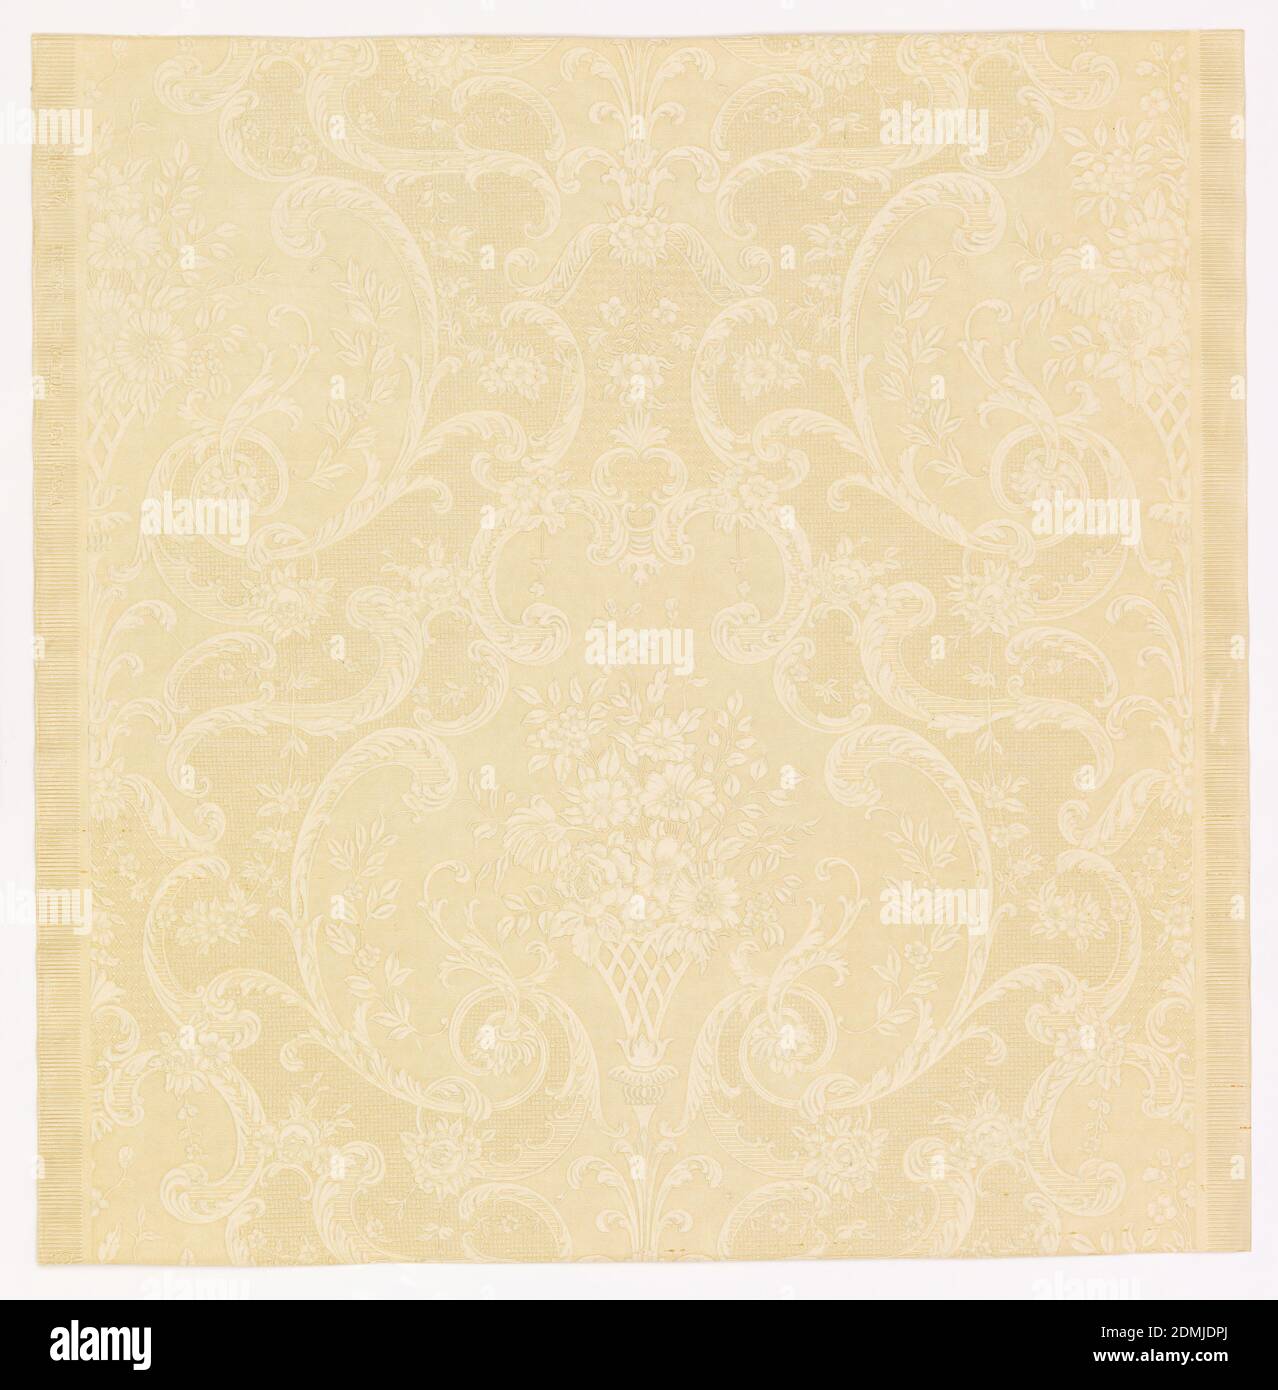 Sidewall, Embossed paper, Embossed floral bouquet set within a basket weave textured diaper pattern. Entire surface is printed in an off-white color., Buffalo, New York, USA, 1890–1900, Wallcoverings, Sidewall Stock Photo